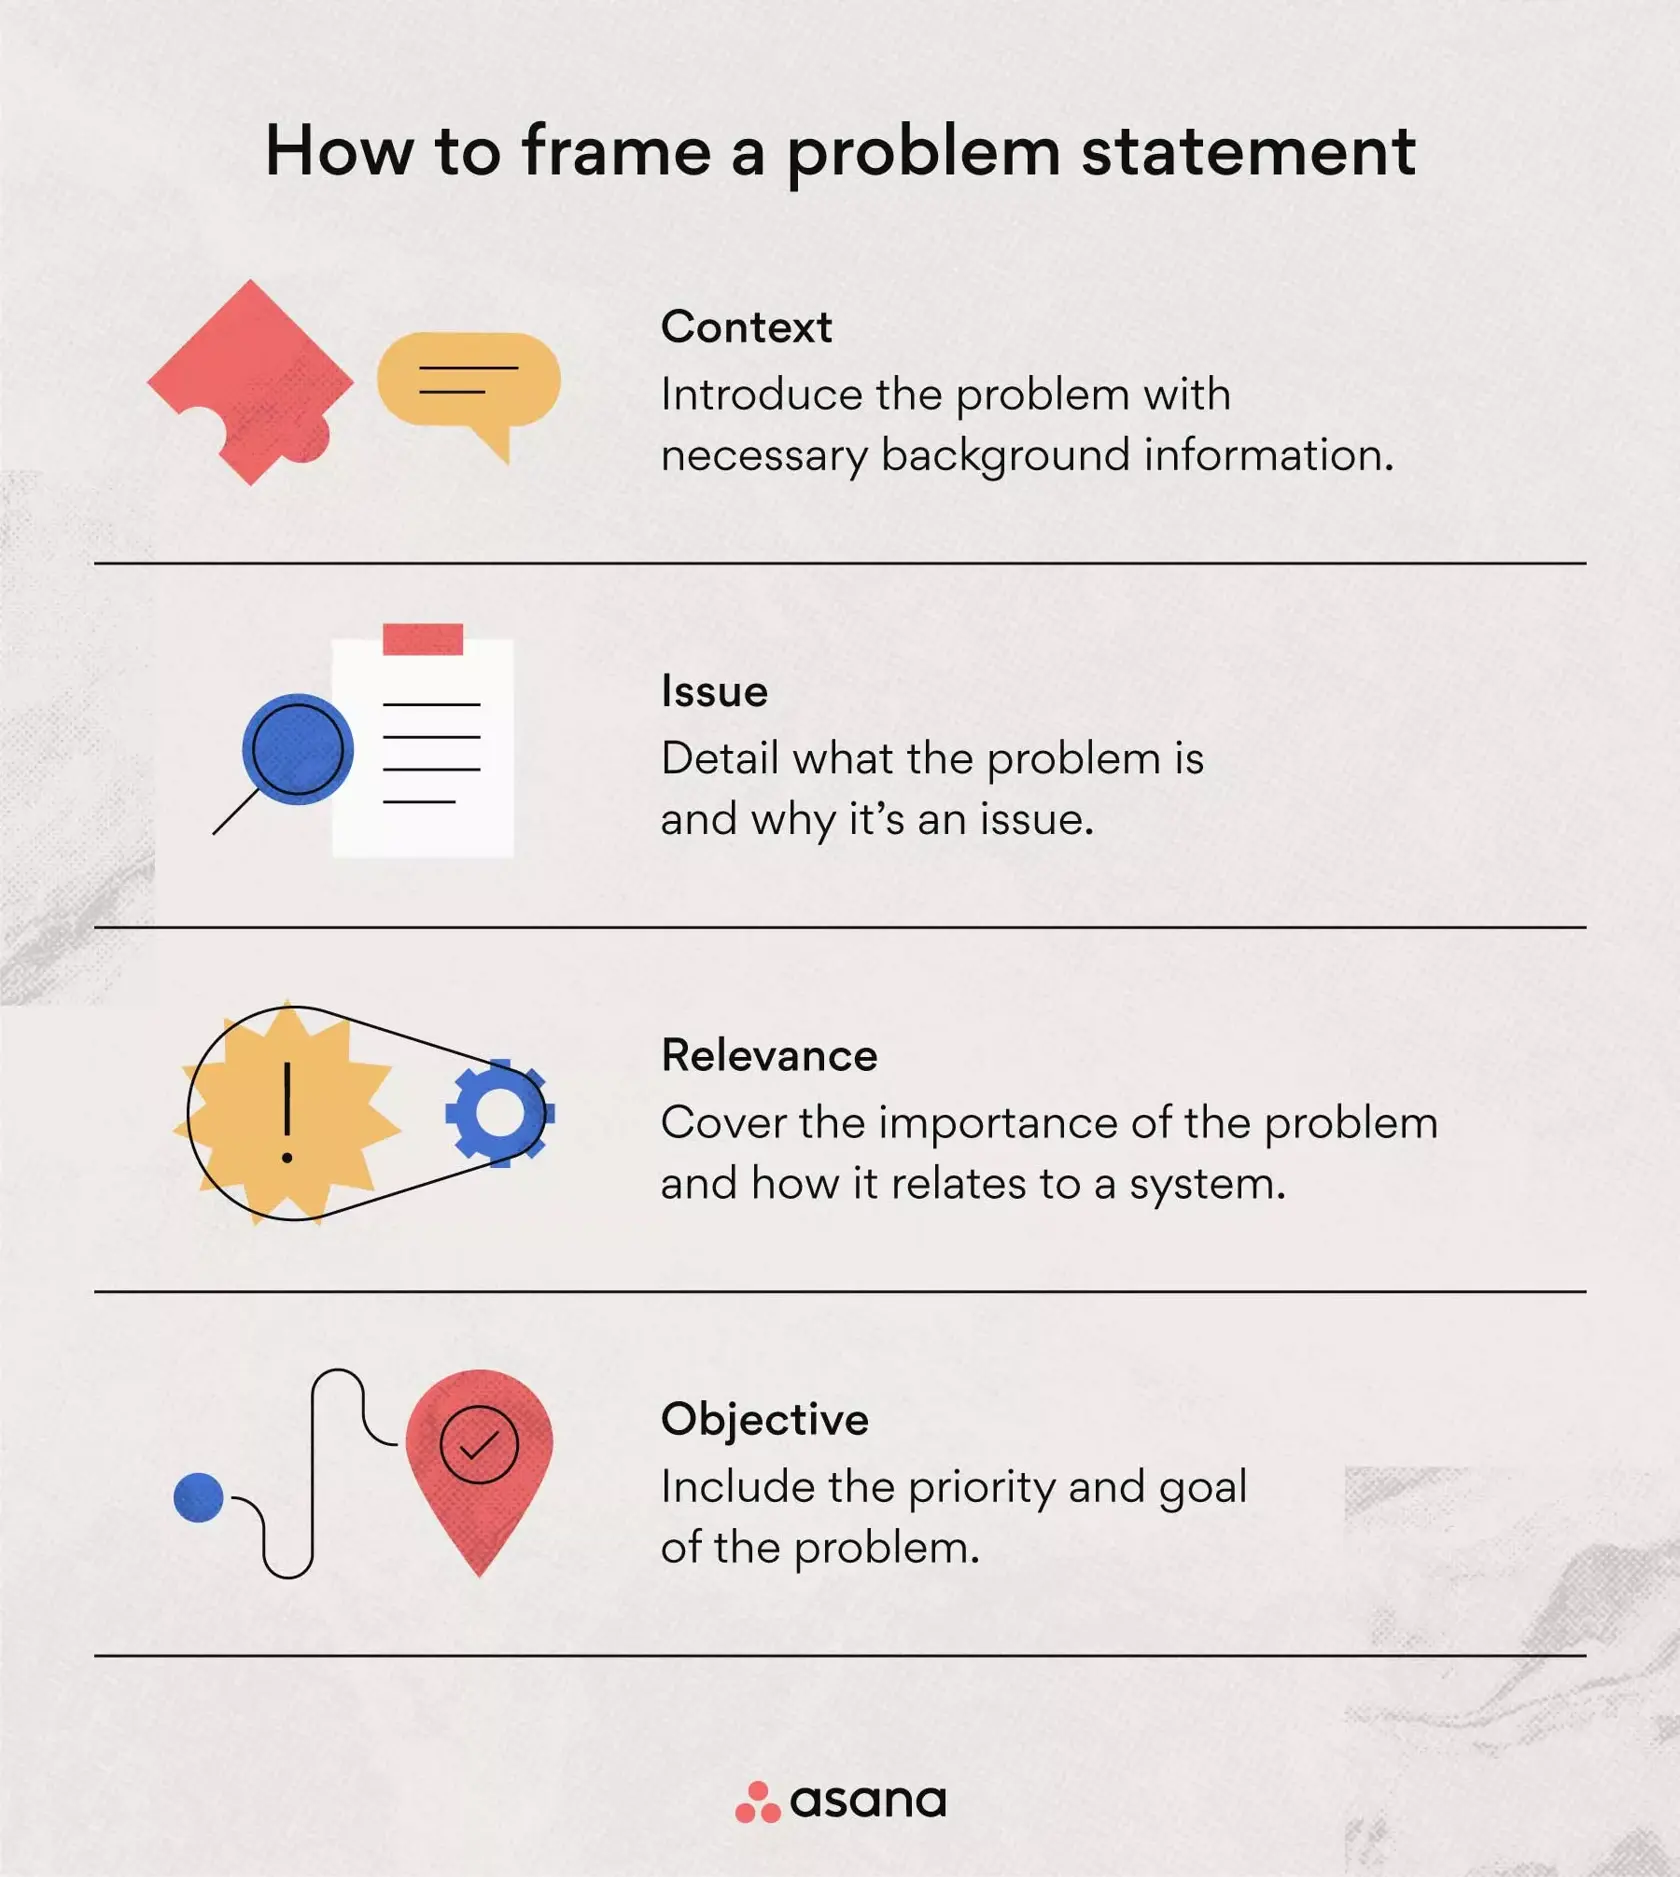 How to frame a problem statement